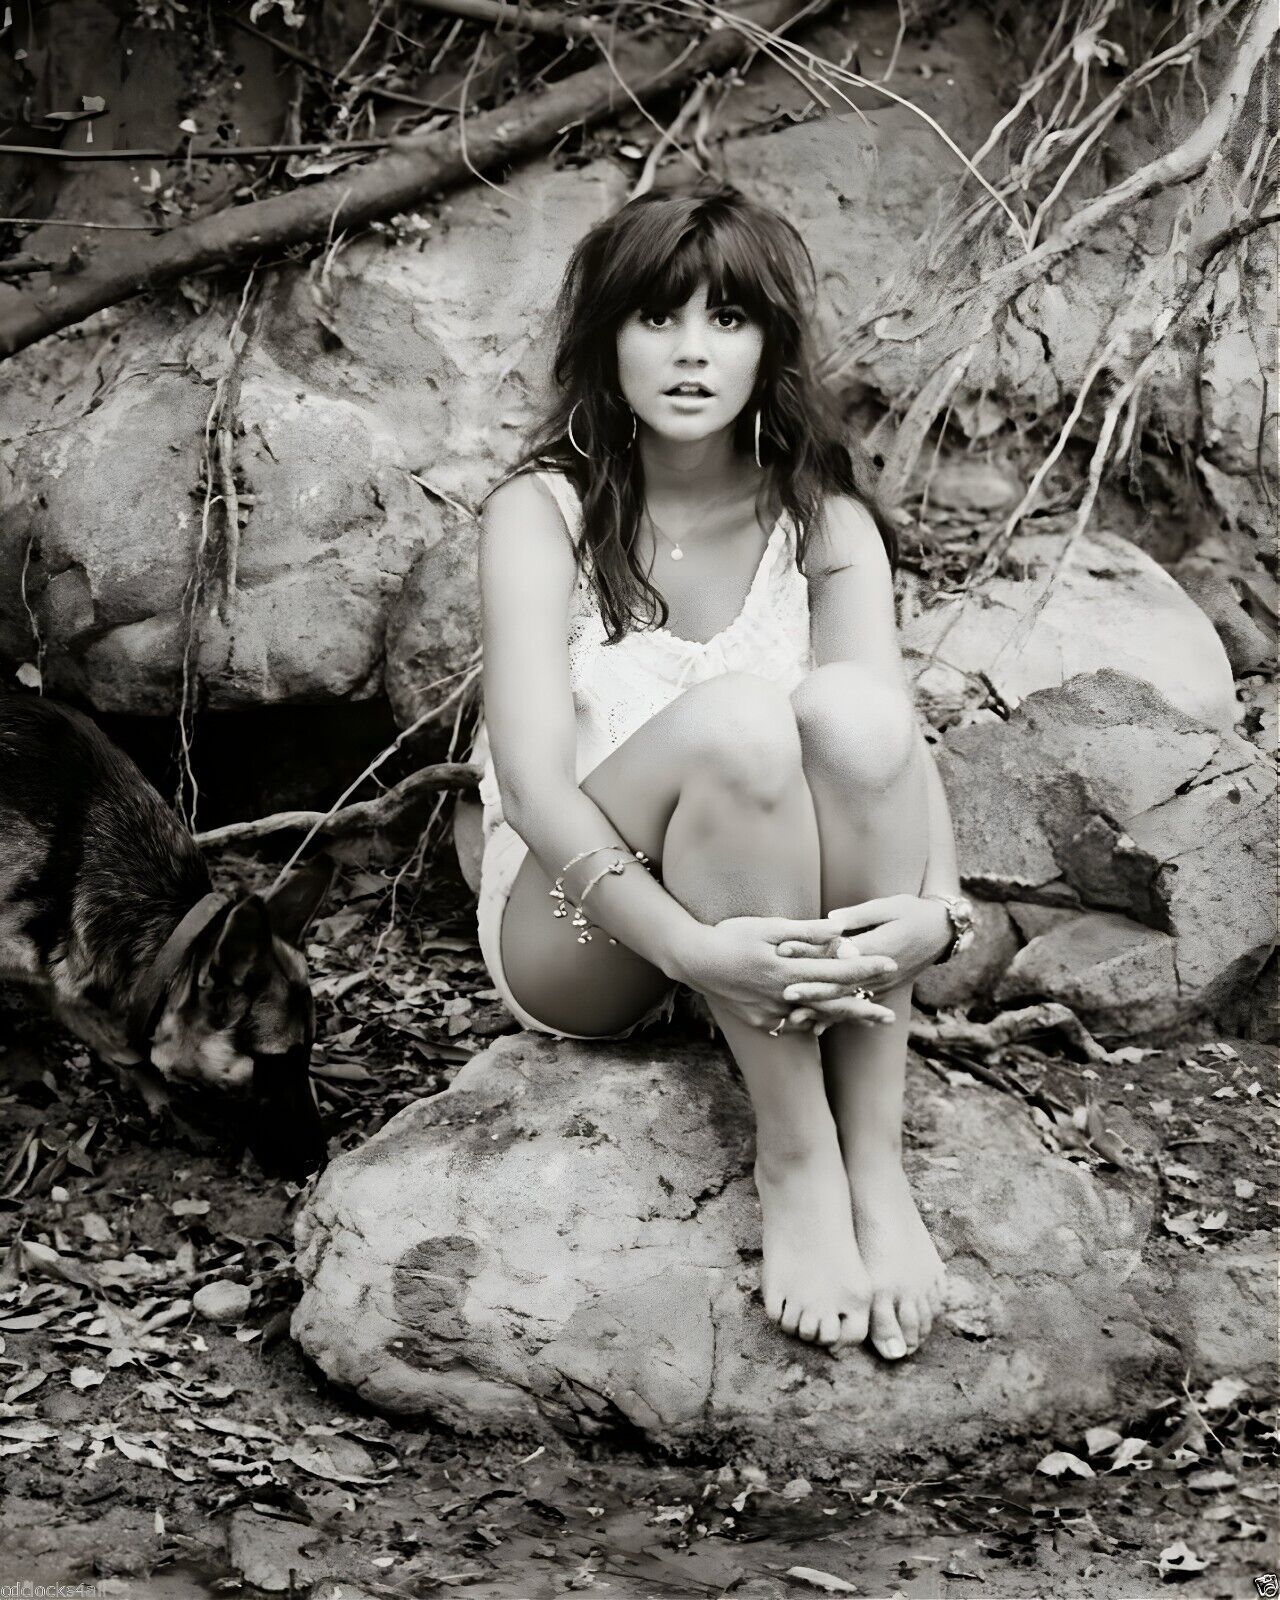 Linda Ronstadt Stone Poneys 8 x 10 Musician Picture Print Photograph Photo a757